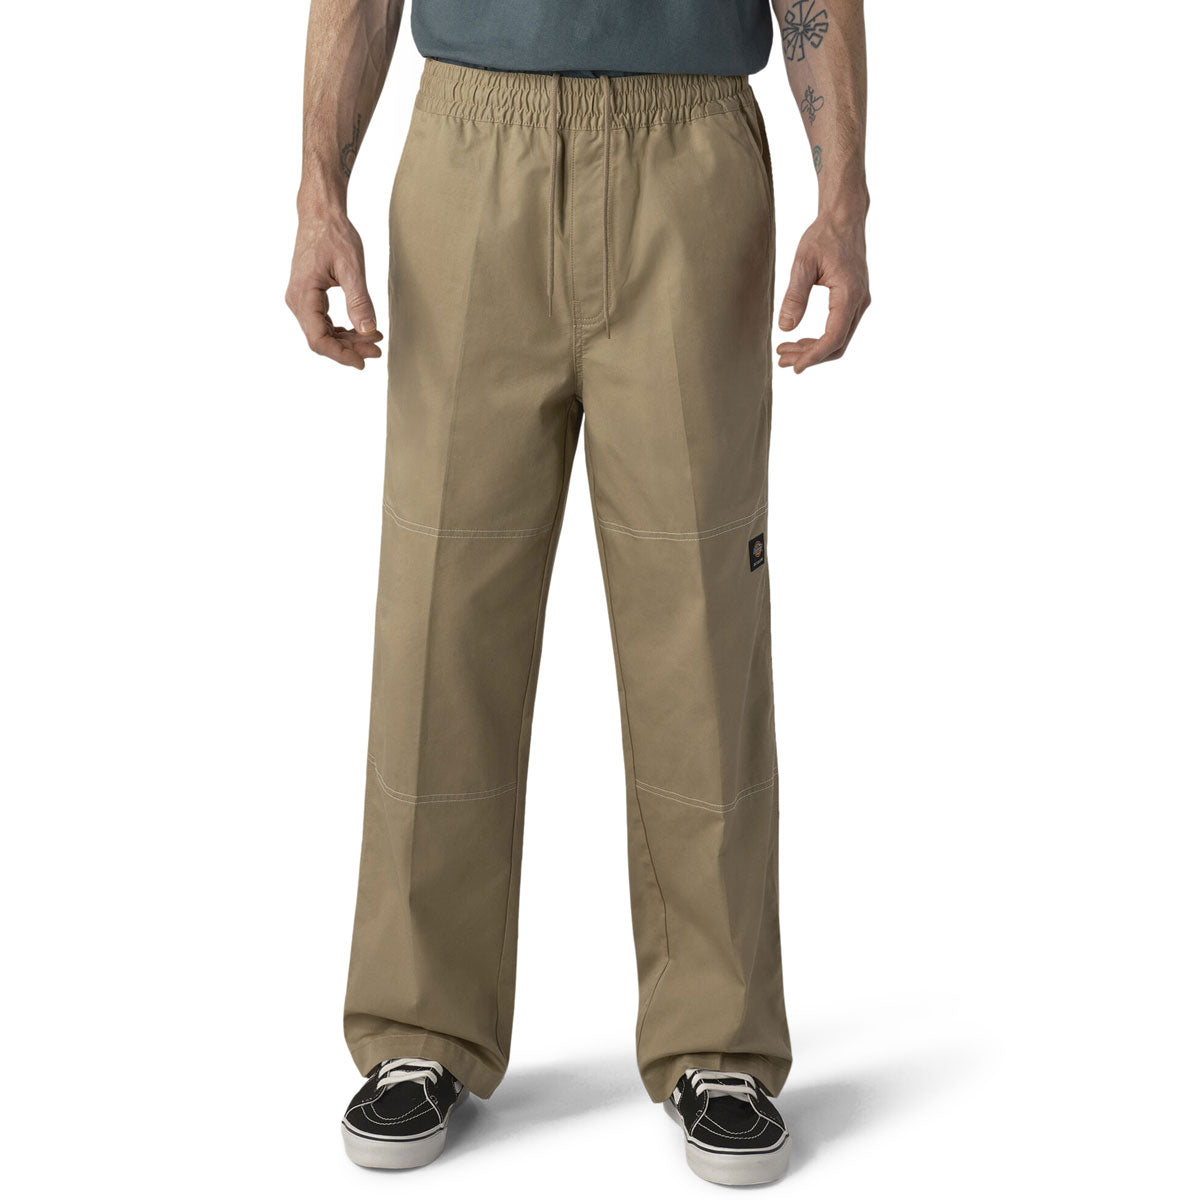 Dickies Summit Relaxed Fit Chef Pants - Desert Sand image 1